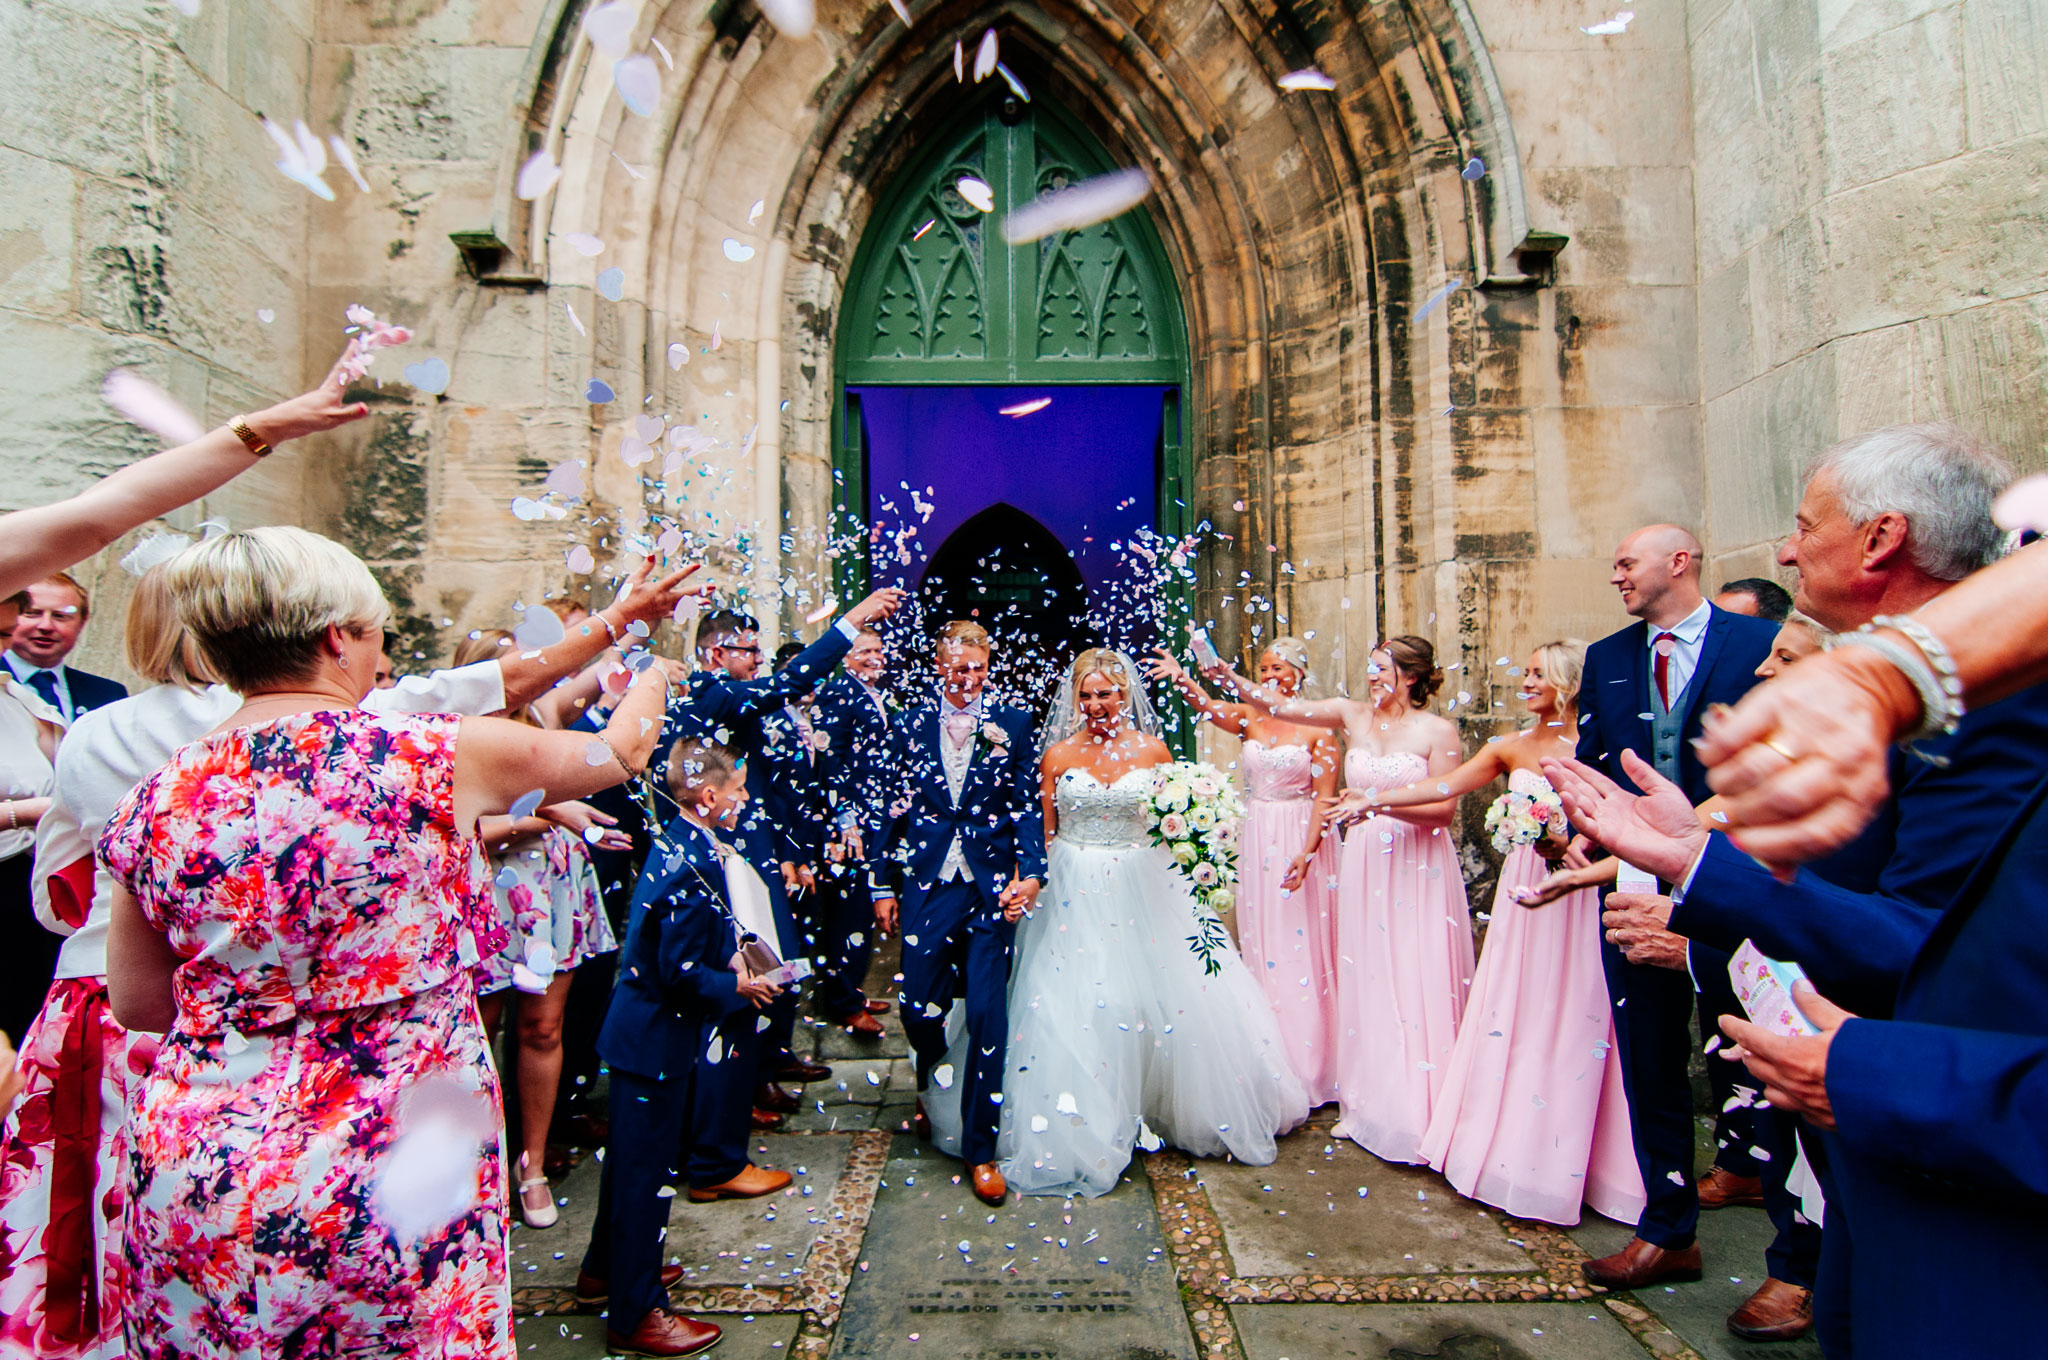 Lisa & Rob’s wedding at Christ Church in Doncaster